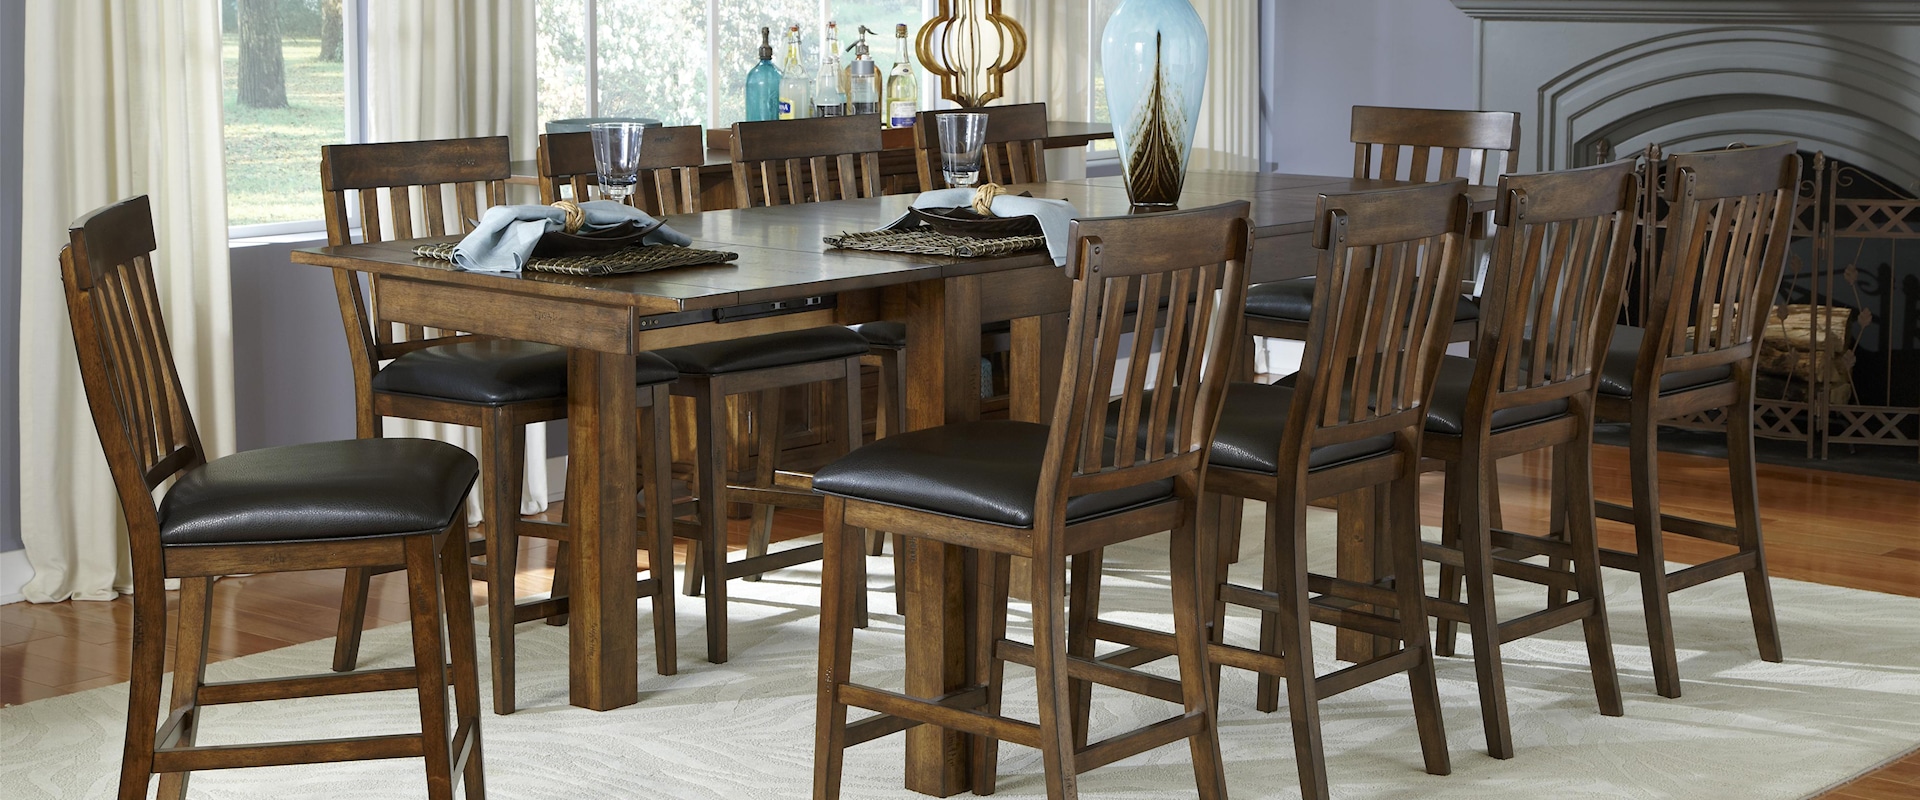 11 Piece Gathering Table and Slatback Chairs Set